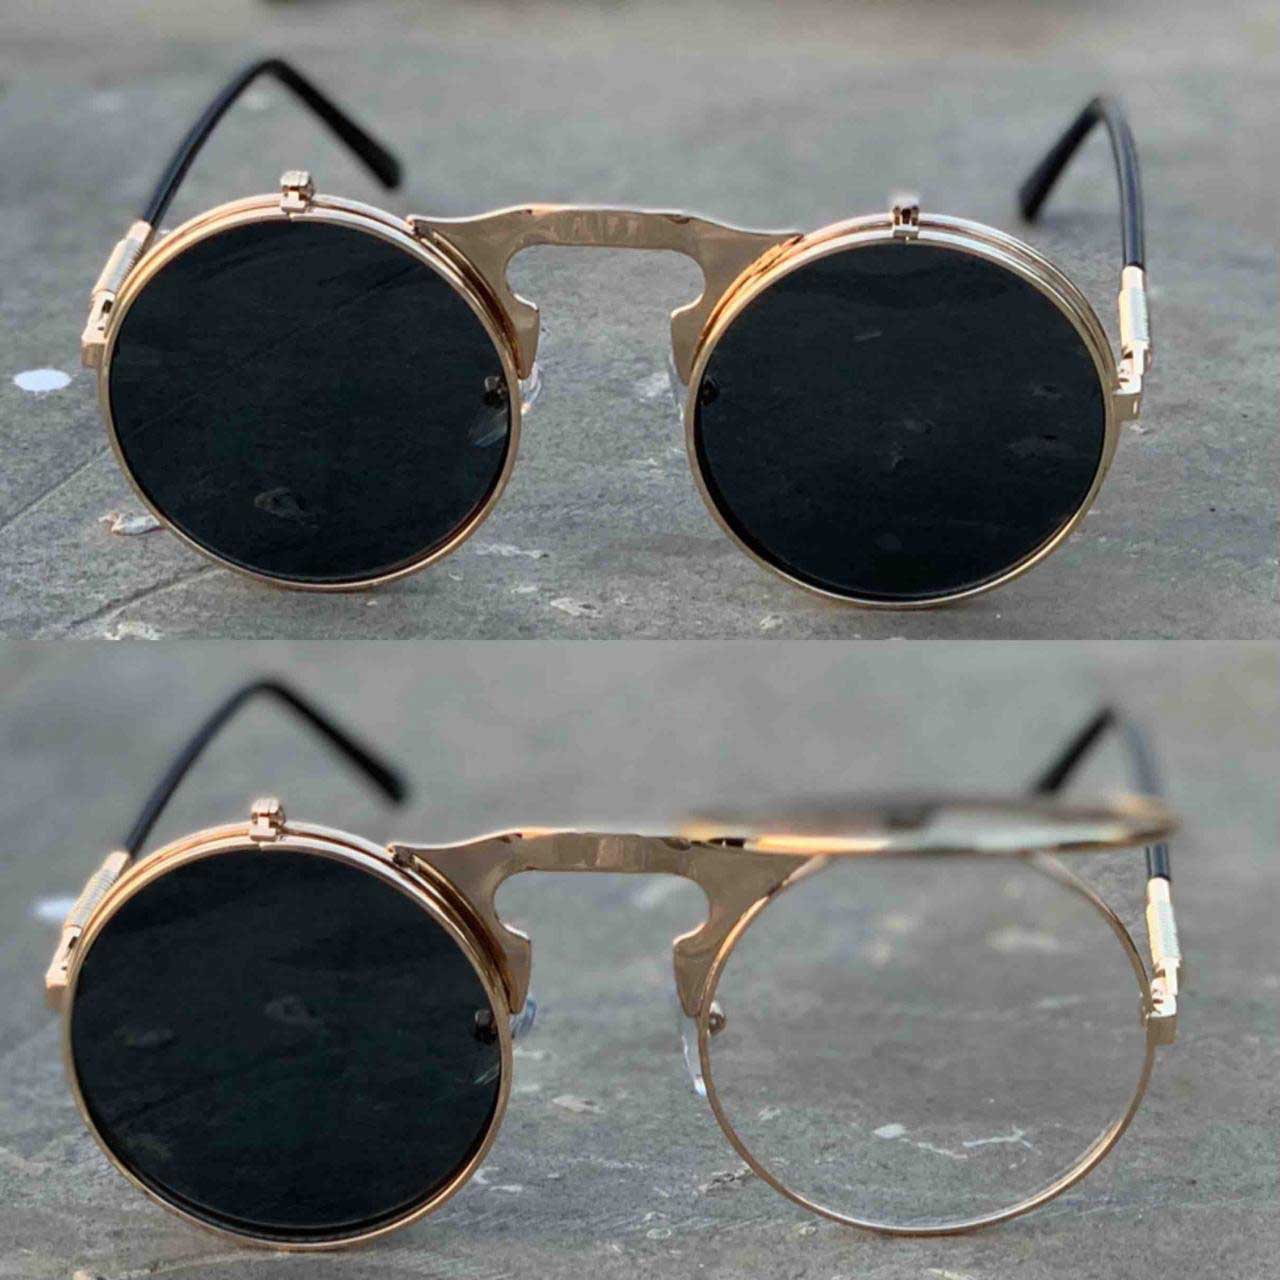 Stylish Round Metal Mirror Sunglasses For Men And Women-Unique and Classy